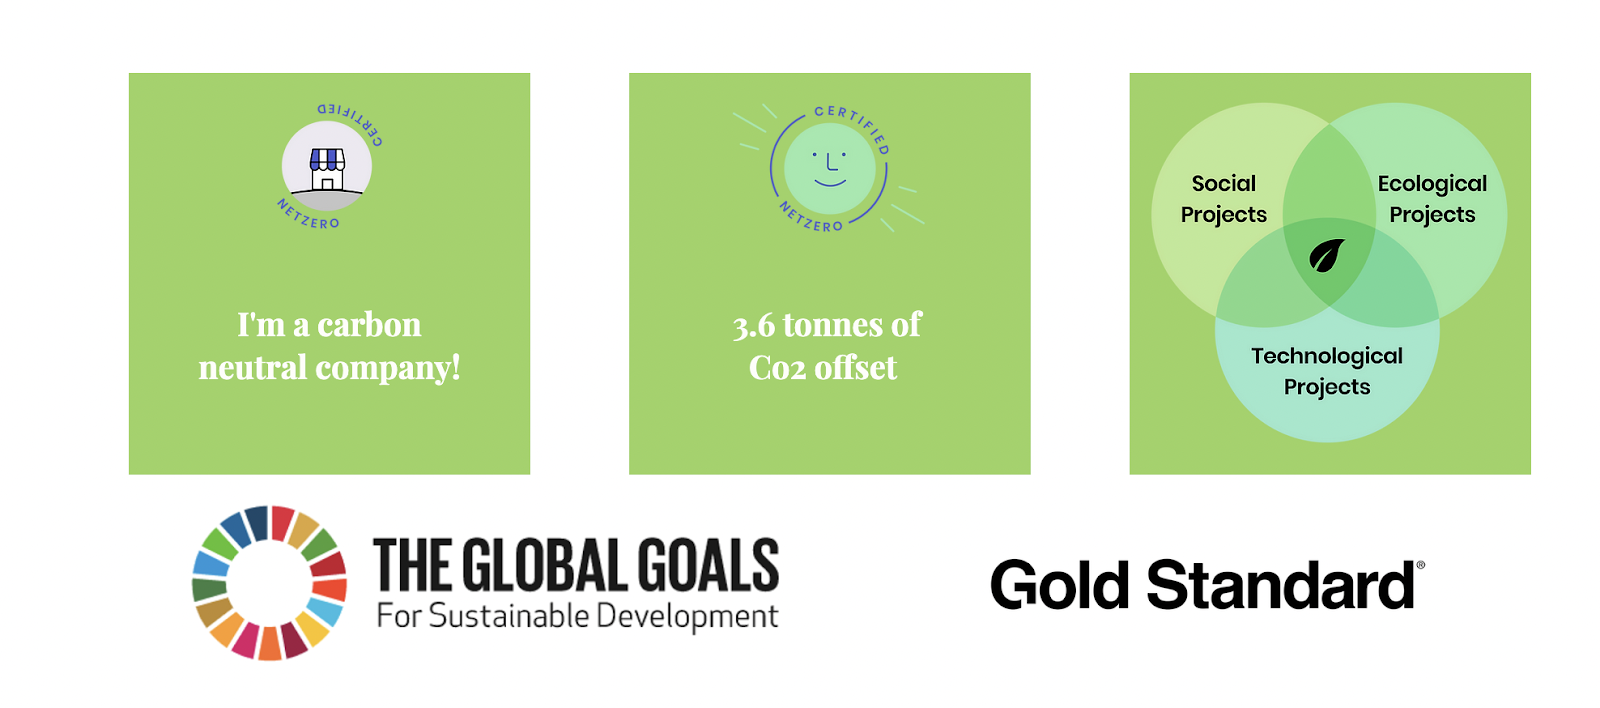 Ecommerce emissions reductions–A screenshot showing various sustainability certifications on an ecommerce brand’s website including: The Global Goals for Sustainable Development and the Gold Standard. 